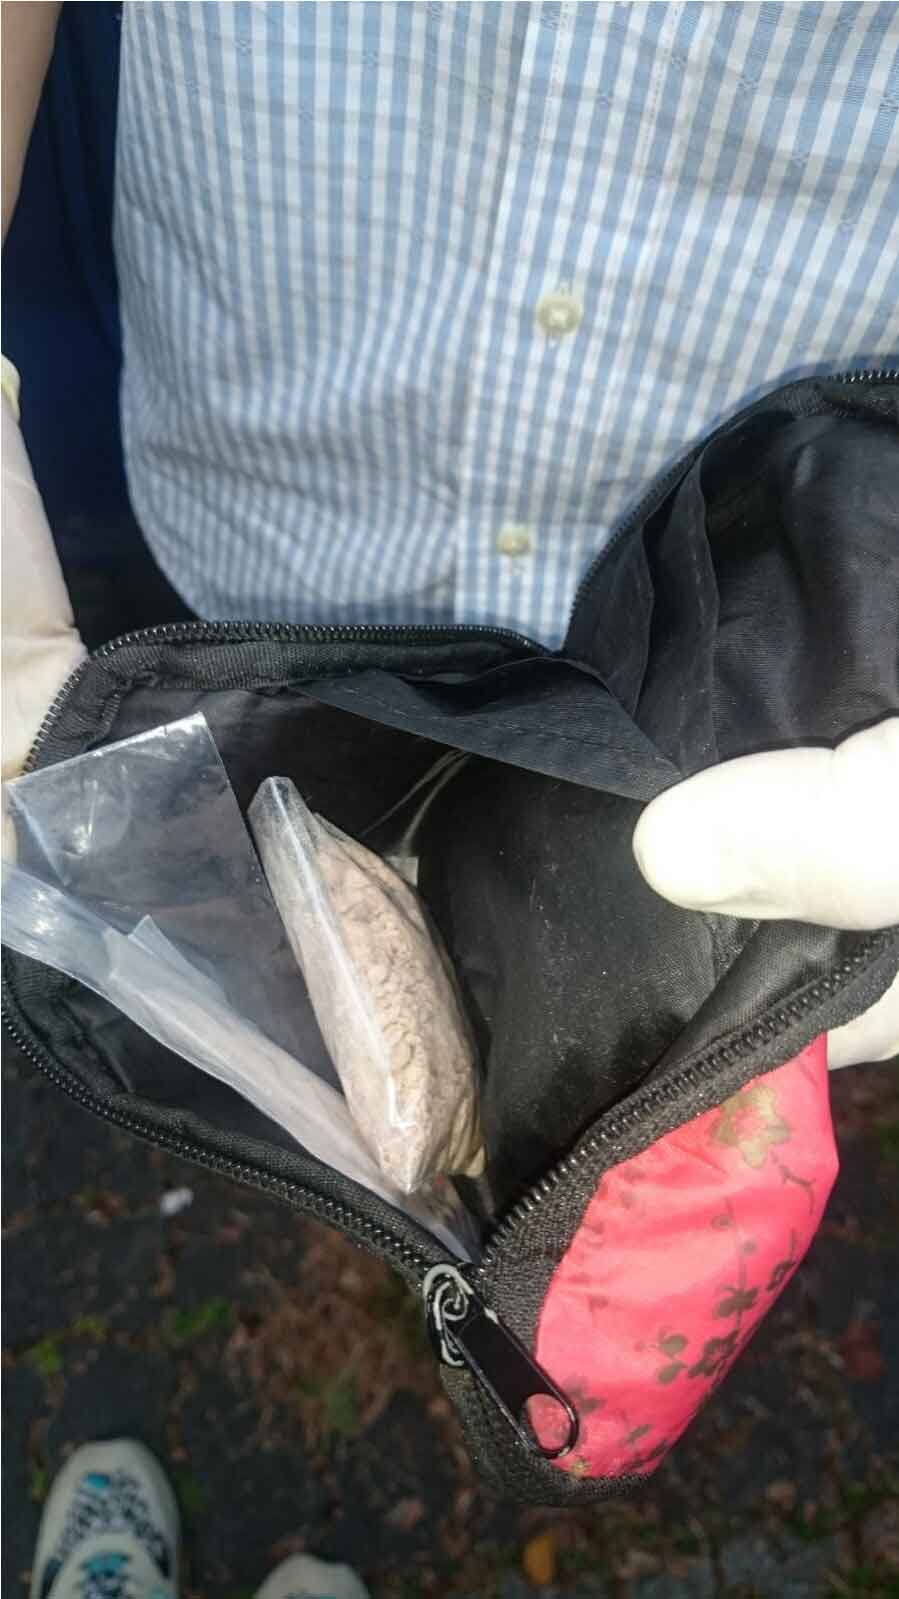 Photo-4: Heroin found in a pouch hidden in compartment behind rear seat of car